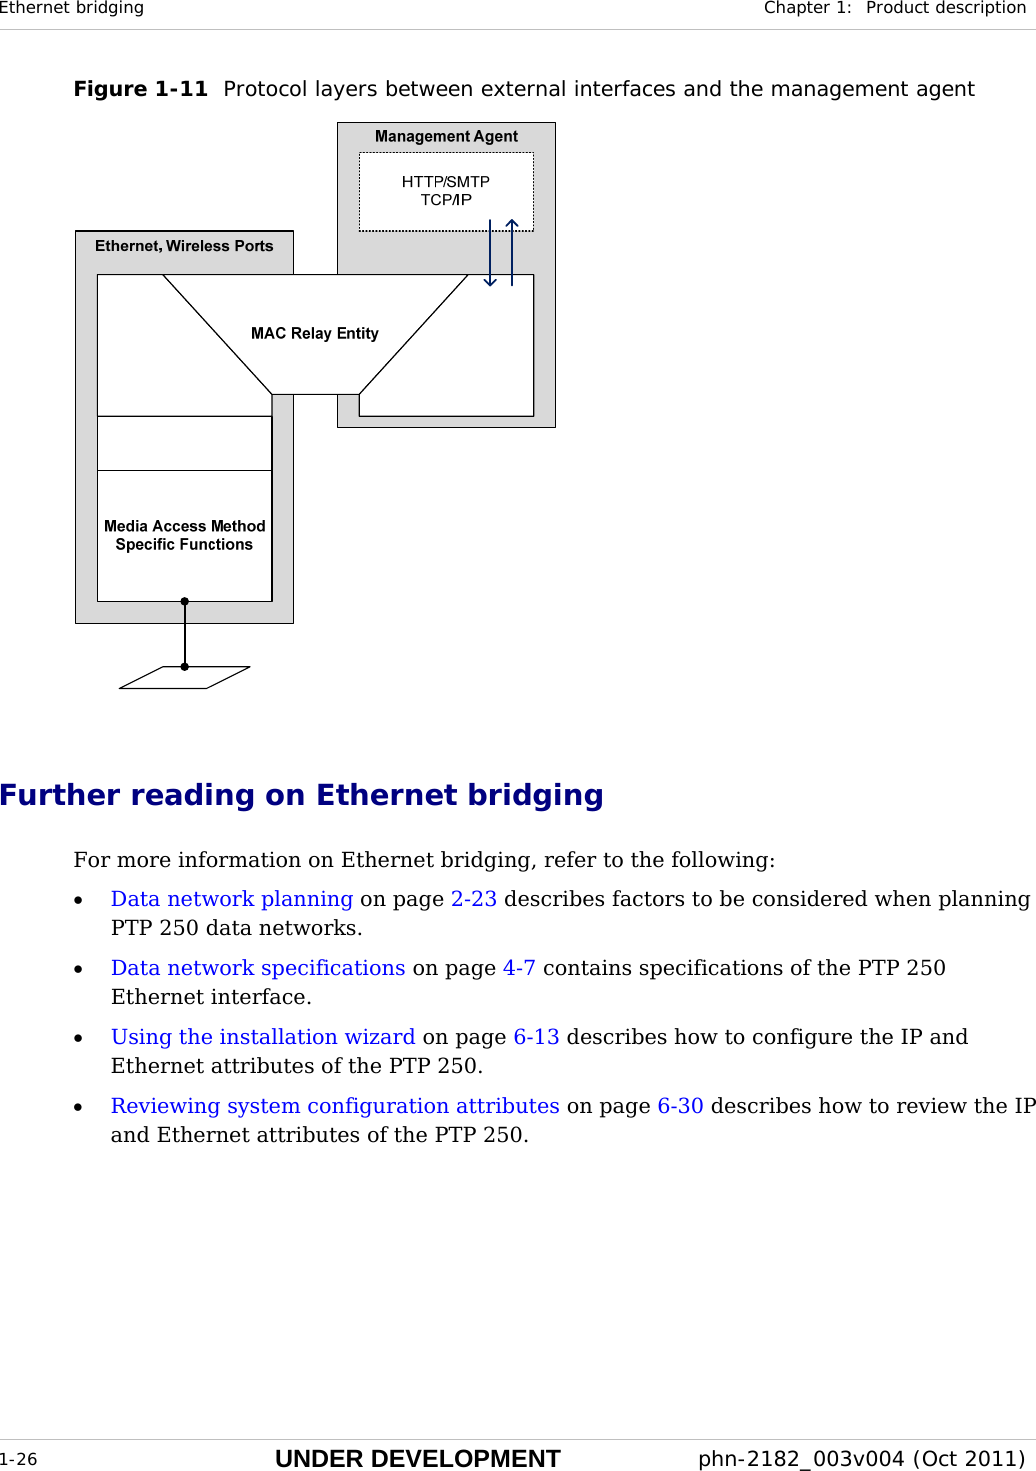 Ethernet bridging  Chapter 1:  Product description  1-26 UNDER DEVELOPMENT  phn-2182_003v004 (Oct 2011)  Figure 1-11  Protocol layers between external interfaces and the management agent   Further reading on Ethernet bridging For more information on Ethernet bridging, refer to the following: • Data network planning on page 2-23 describes factors to be considered when planning PTP 250 data networks. • Data network specifications on page 4-7 contains specifications of the PTP 250 Ethernet interface. • Using the installation wizard on page 6-13 describes how to configure the IP and Ethernet attributes of the PTP 250. • Reviewing system configuration attributes on page 6-30 describes how to review the IP and Ethernet attributes of the PTP 250.   